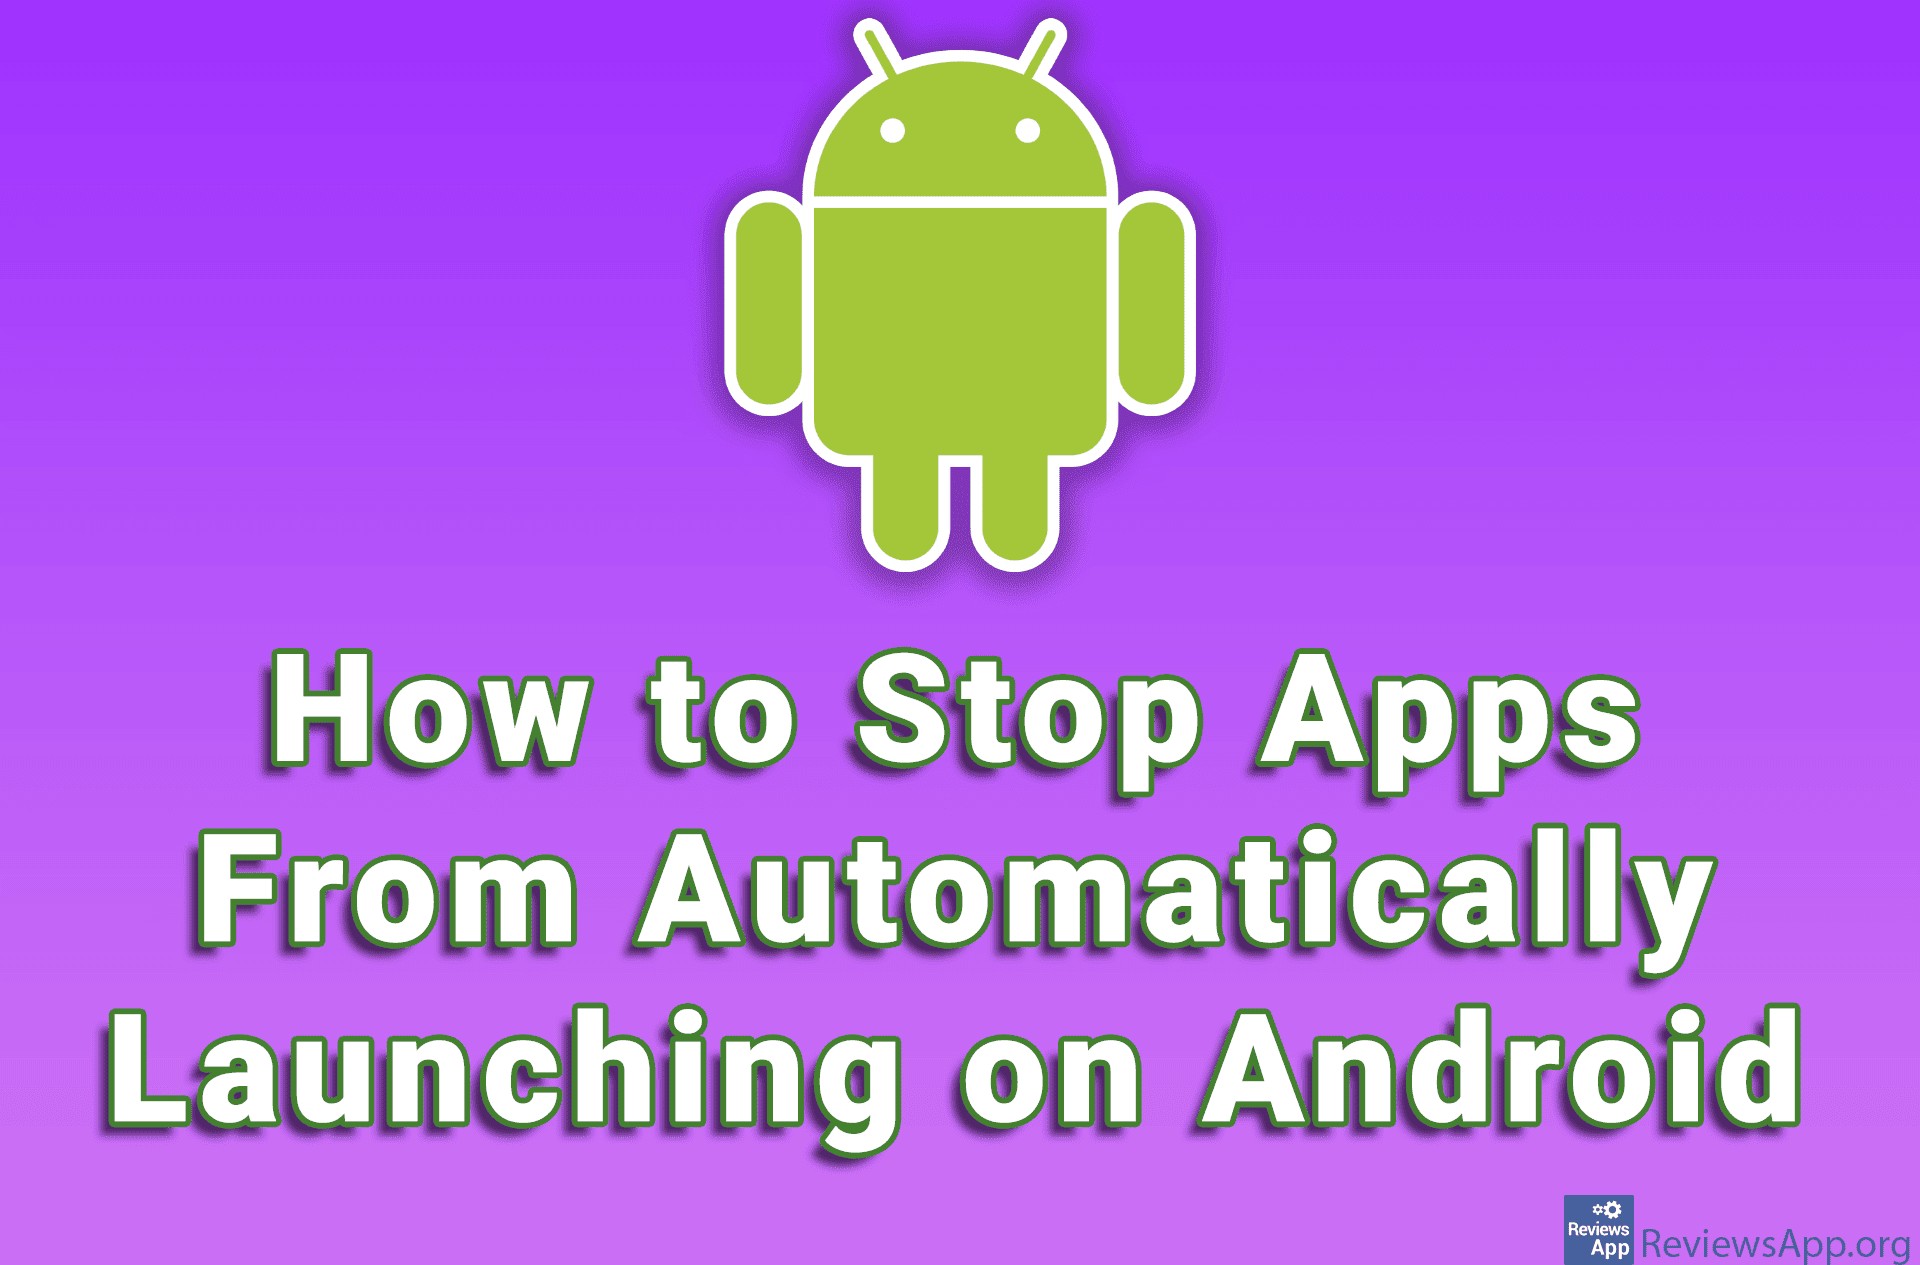 How to Stop Apps From Automatically Launching on Android